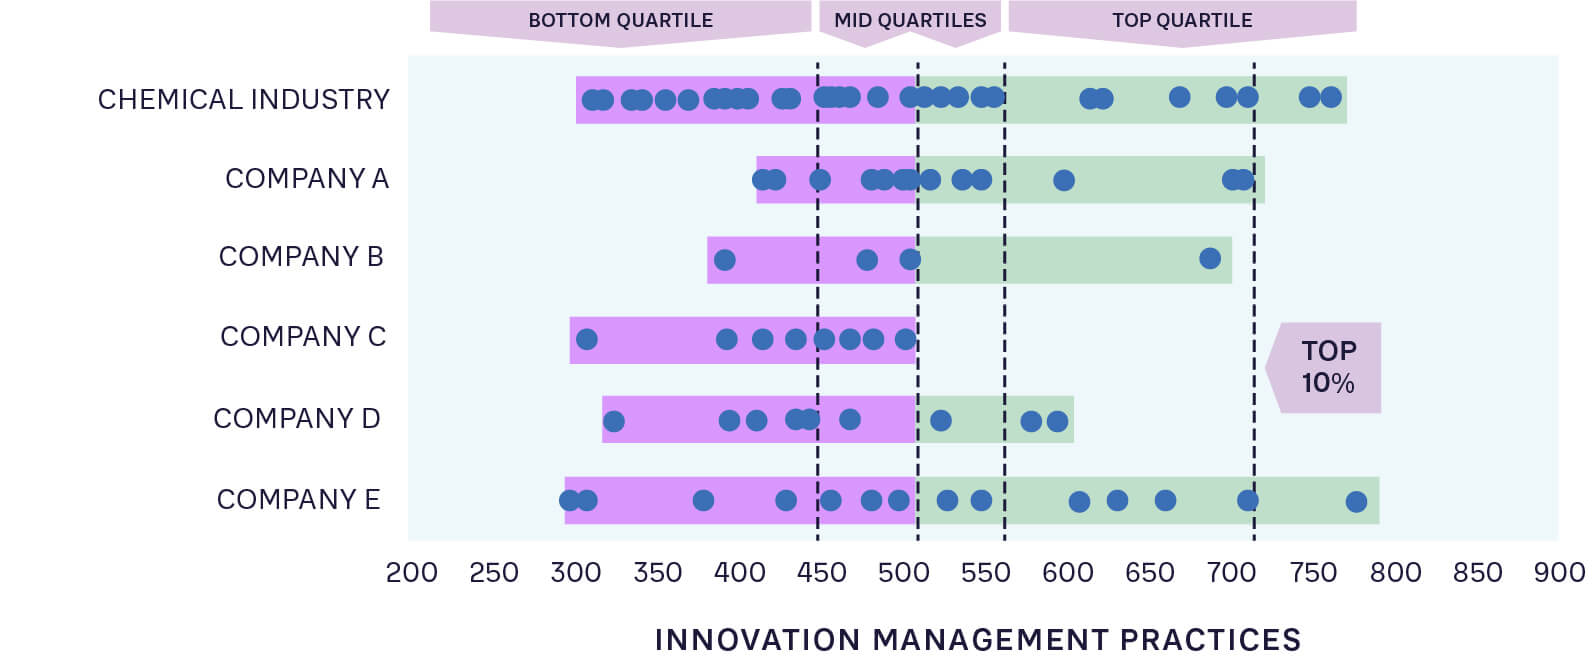 FIGURE 2: INDIVIDUAL BU INNOVATION MANAGEMENT PRACTICE SCORES ACROSS FIVE COMPANIES IN THE CHEMICAL SECTOR